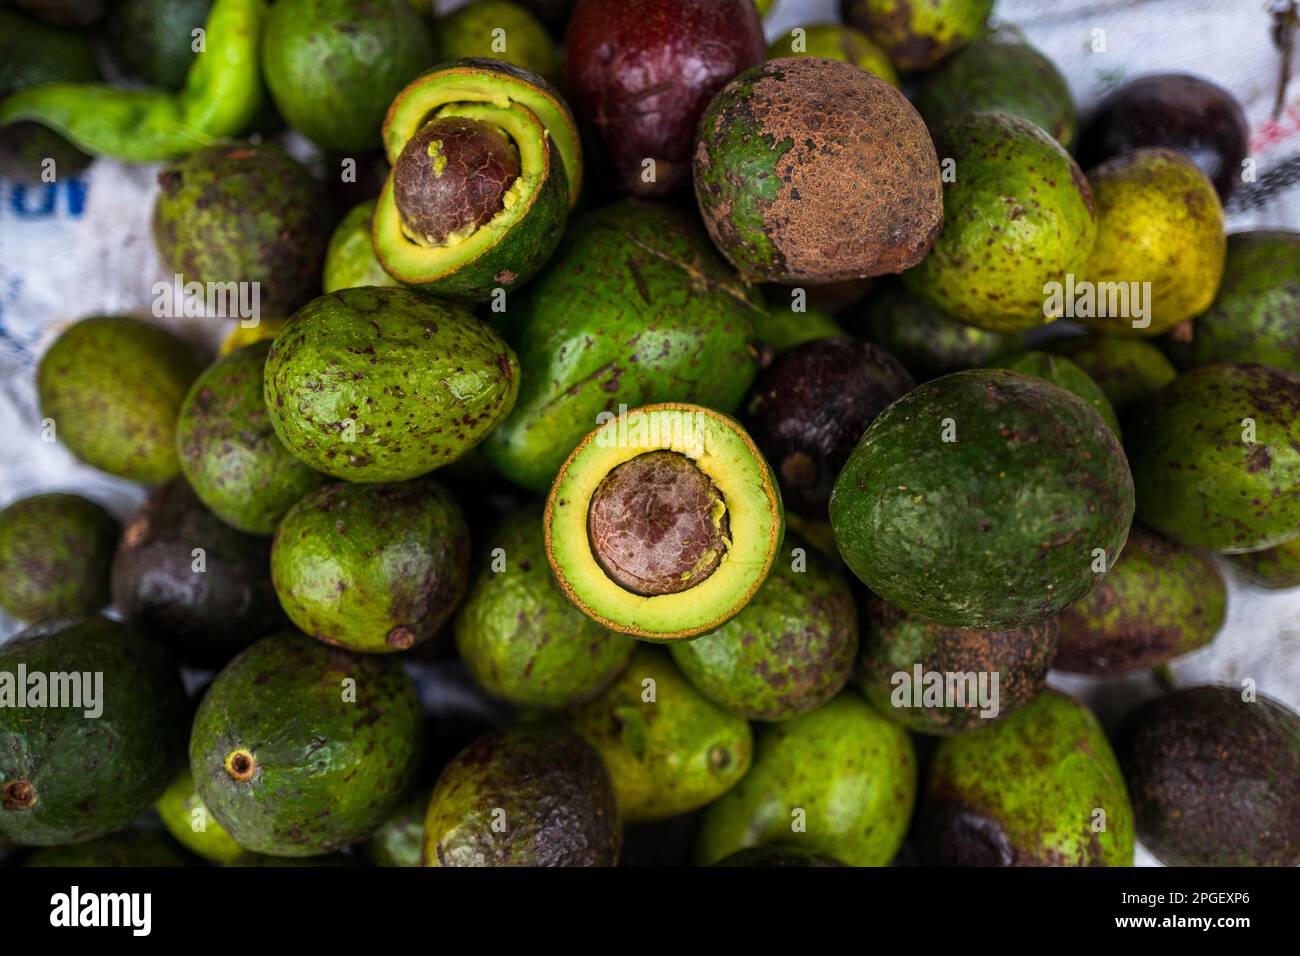 Fresh and ripe avocados are seen piled on the market stand for sale in the street market in Cali, Colombia. Stock Photo